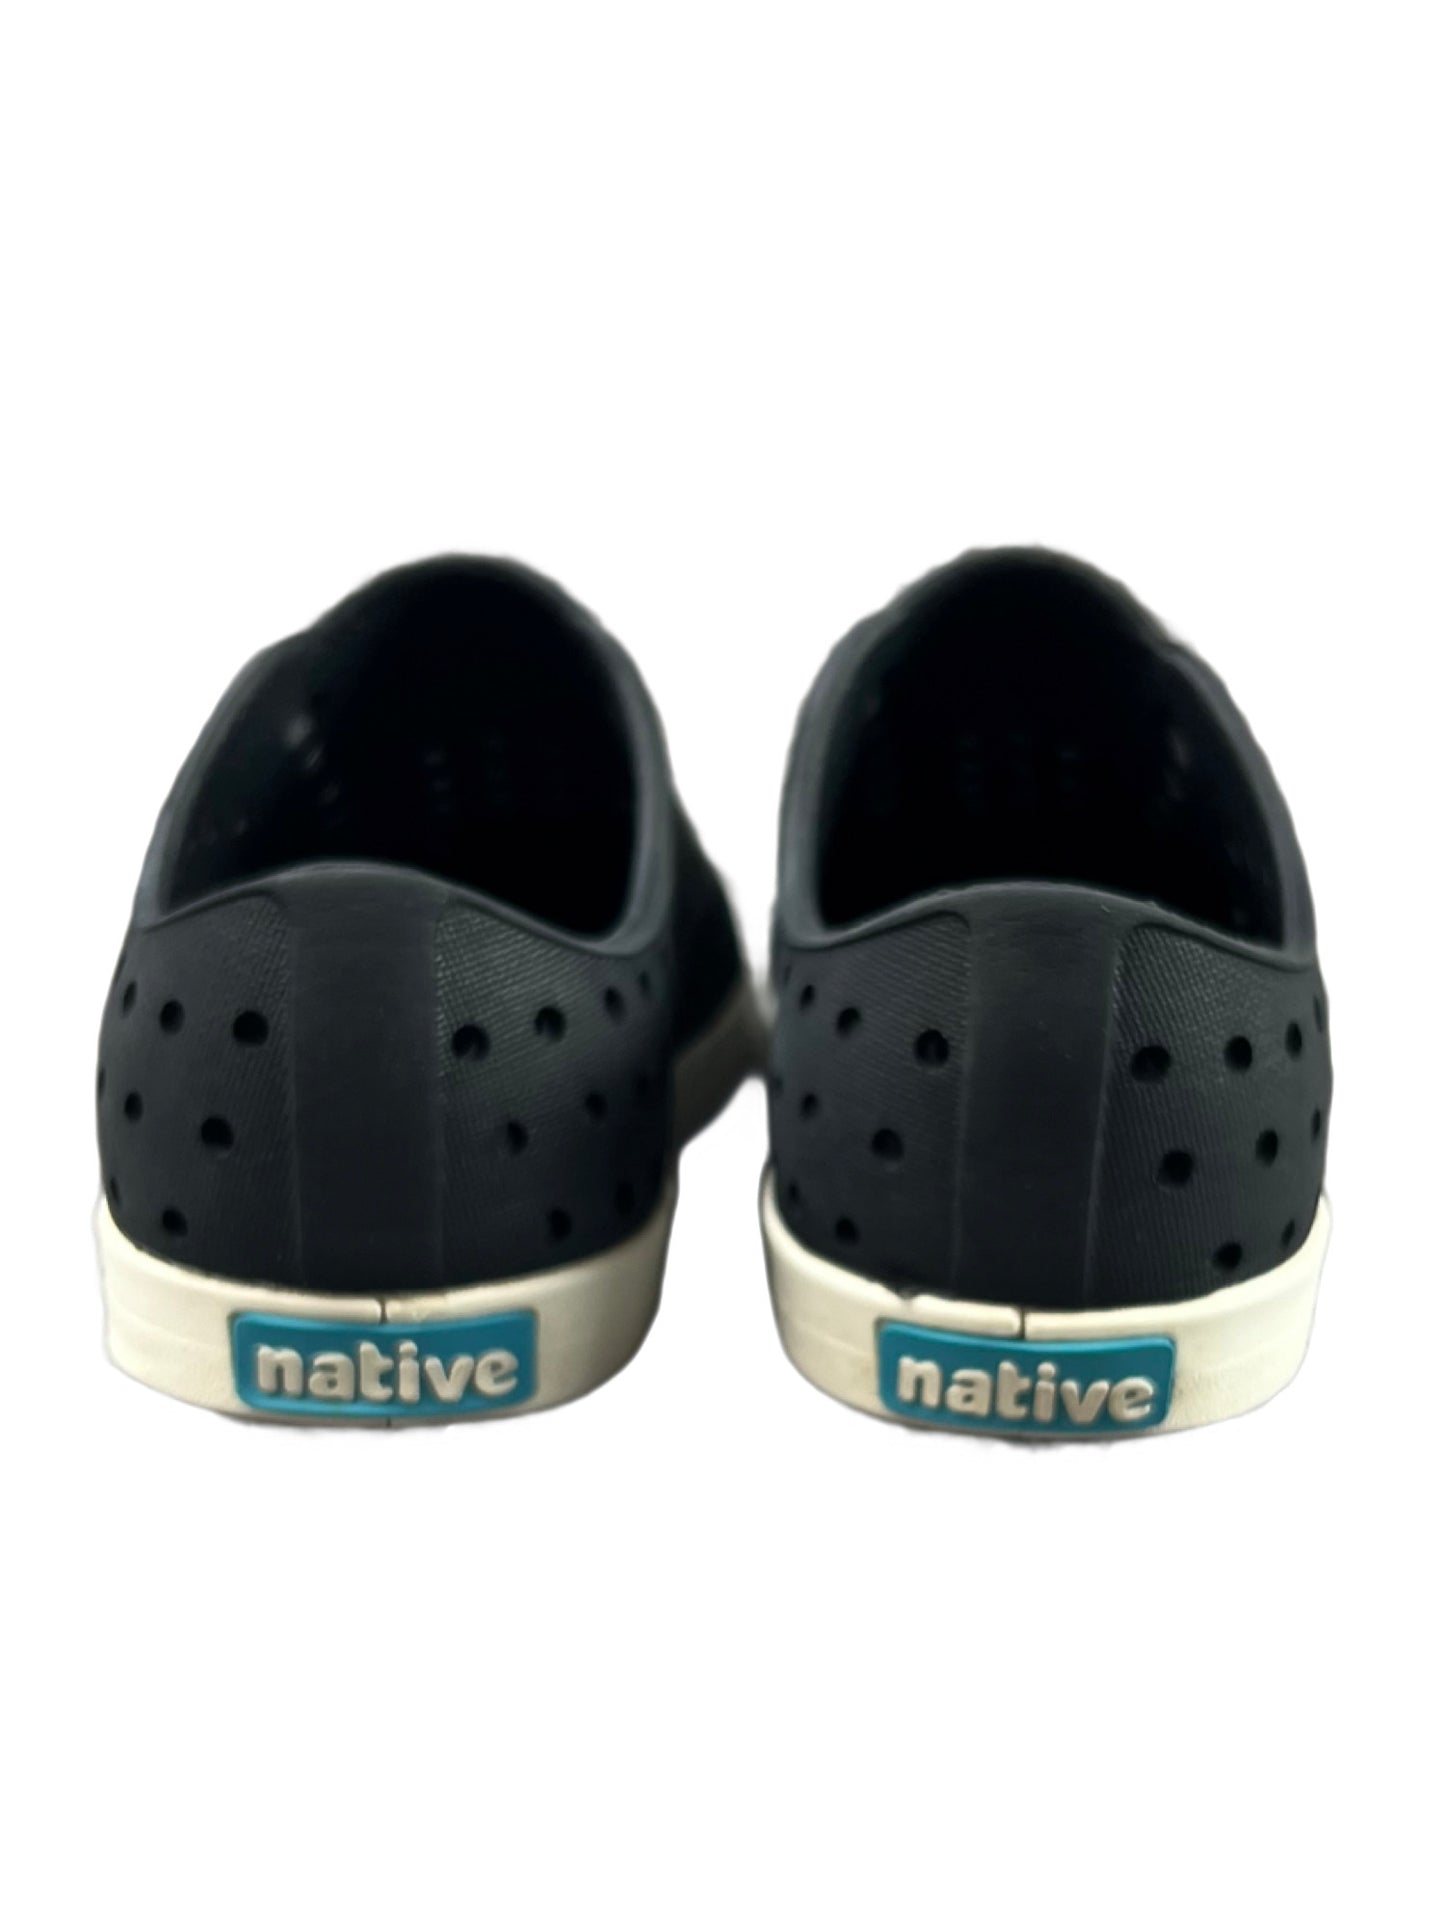 Shoes Toddler 9.0 Native